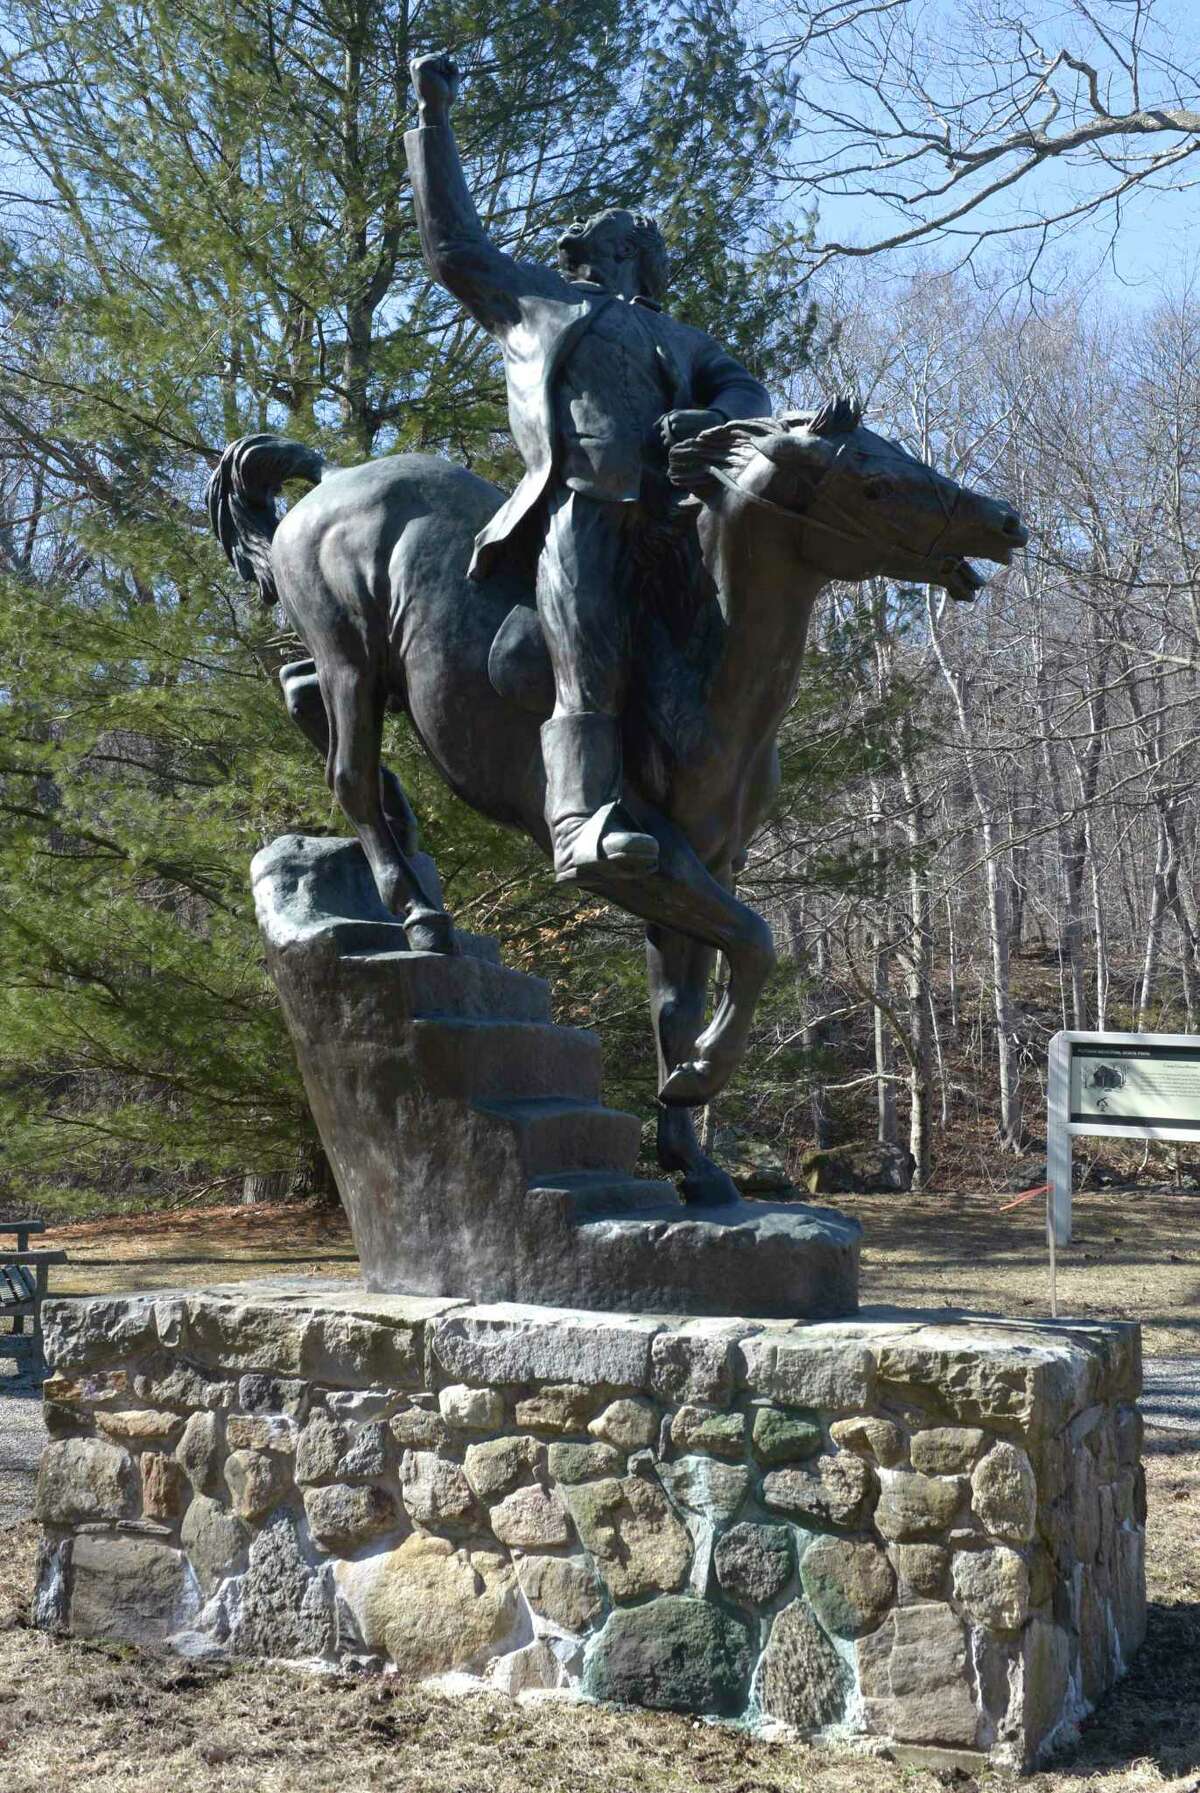 Sculpture of General Israel Putnam, at the entrance to Putnam Memorial Park by the late sculptor Anna Hyatt Huntington. Friday, February 21, 2020, in Redding, Connecticut. It commemorates Putnam's escape from the British in 1779, when he rode down a cliff at Horseneck Heights in Greenwich.